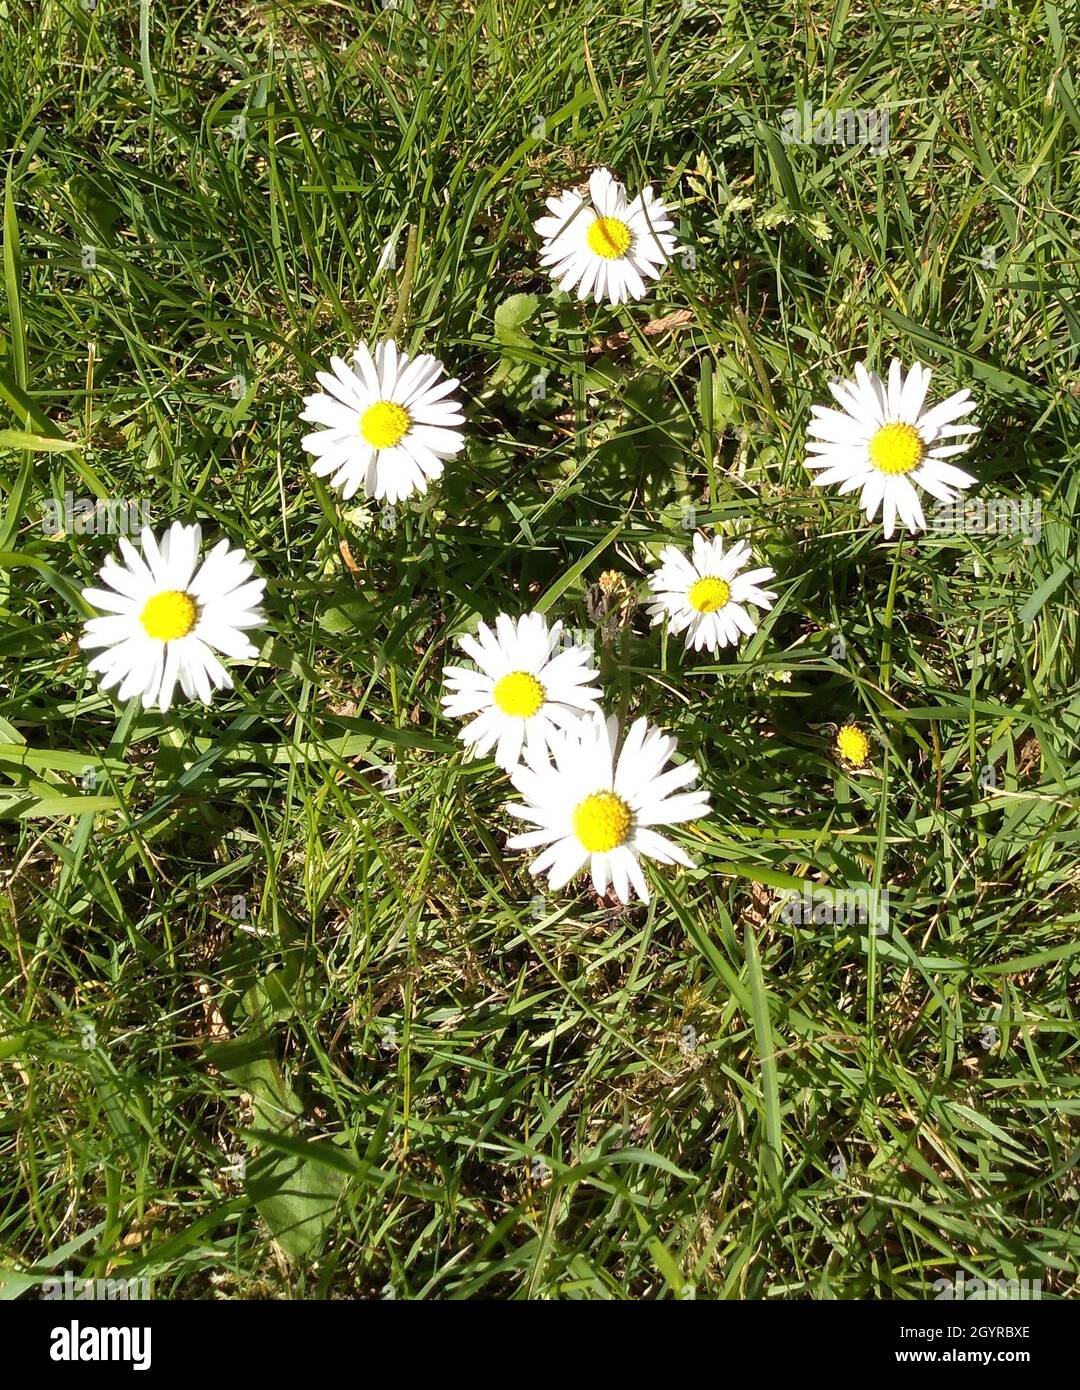 Daisies growing in spring sunshine. Daisies growing in a meadow or garden. Tiny wild Daisies, new beginnings. White petals and spring picinics. Stock Photo